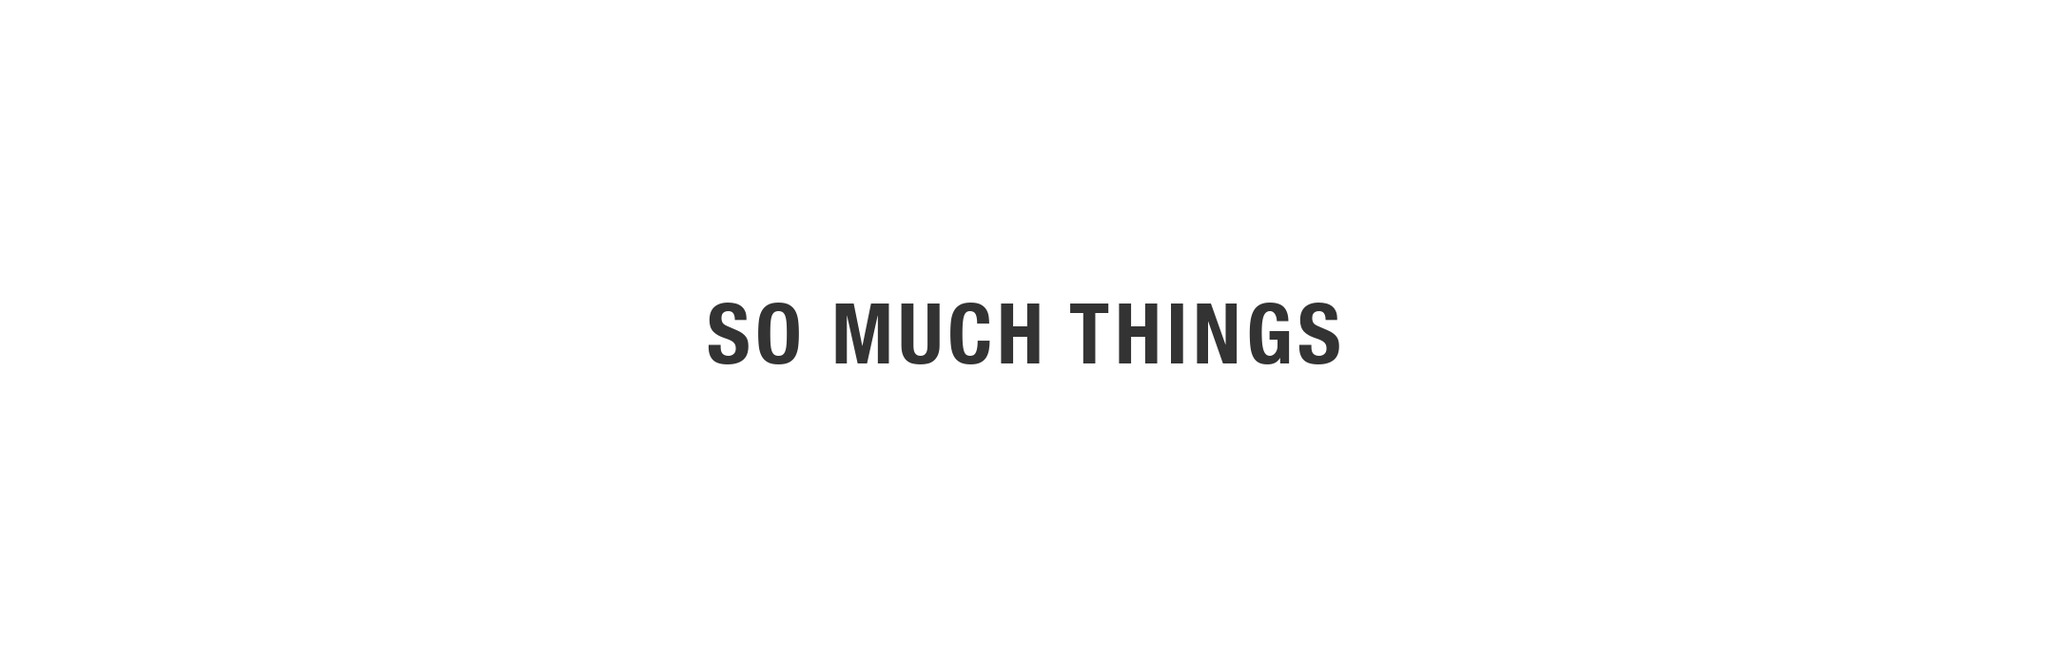 SO MUCH THINGS